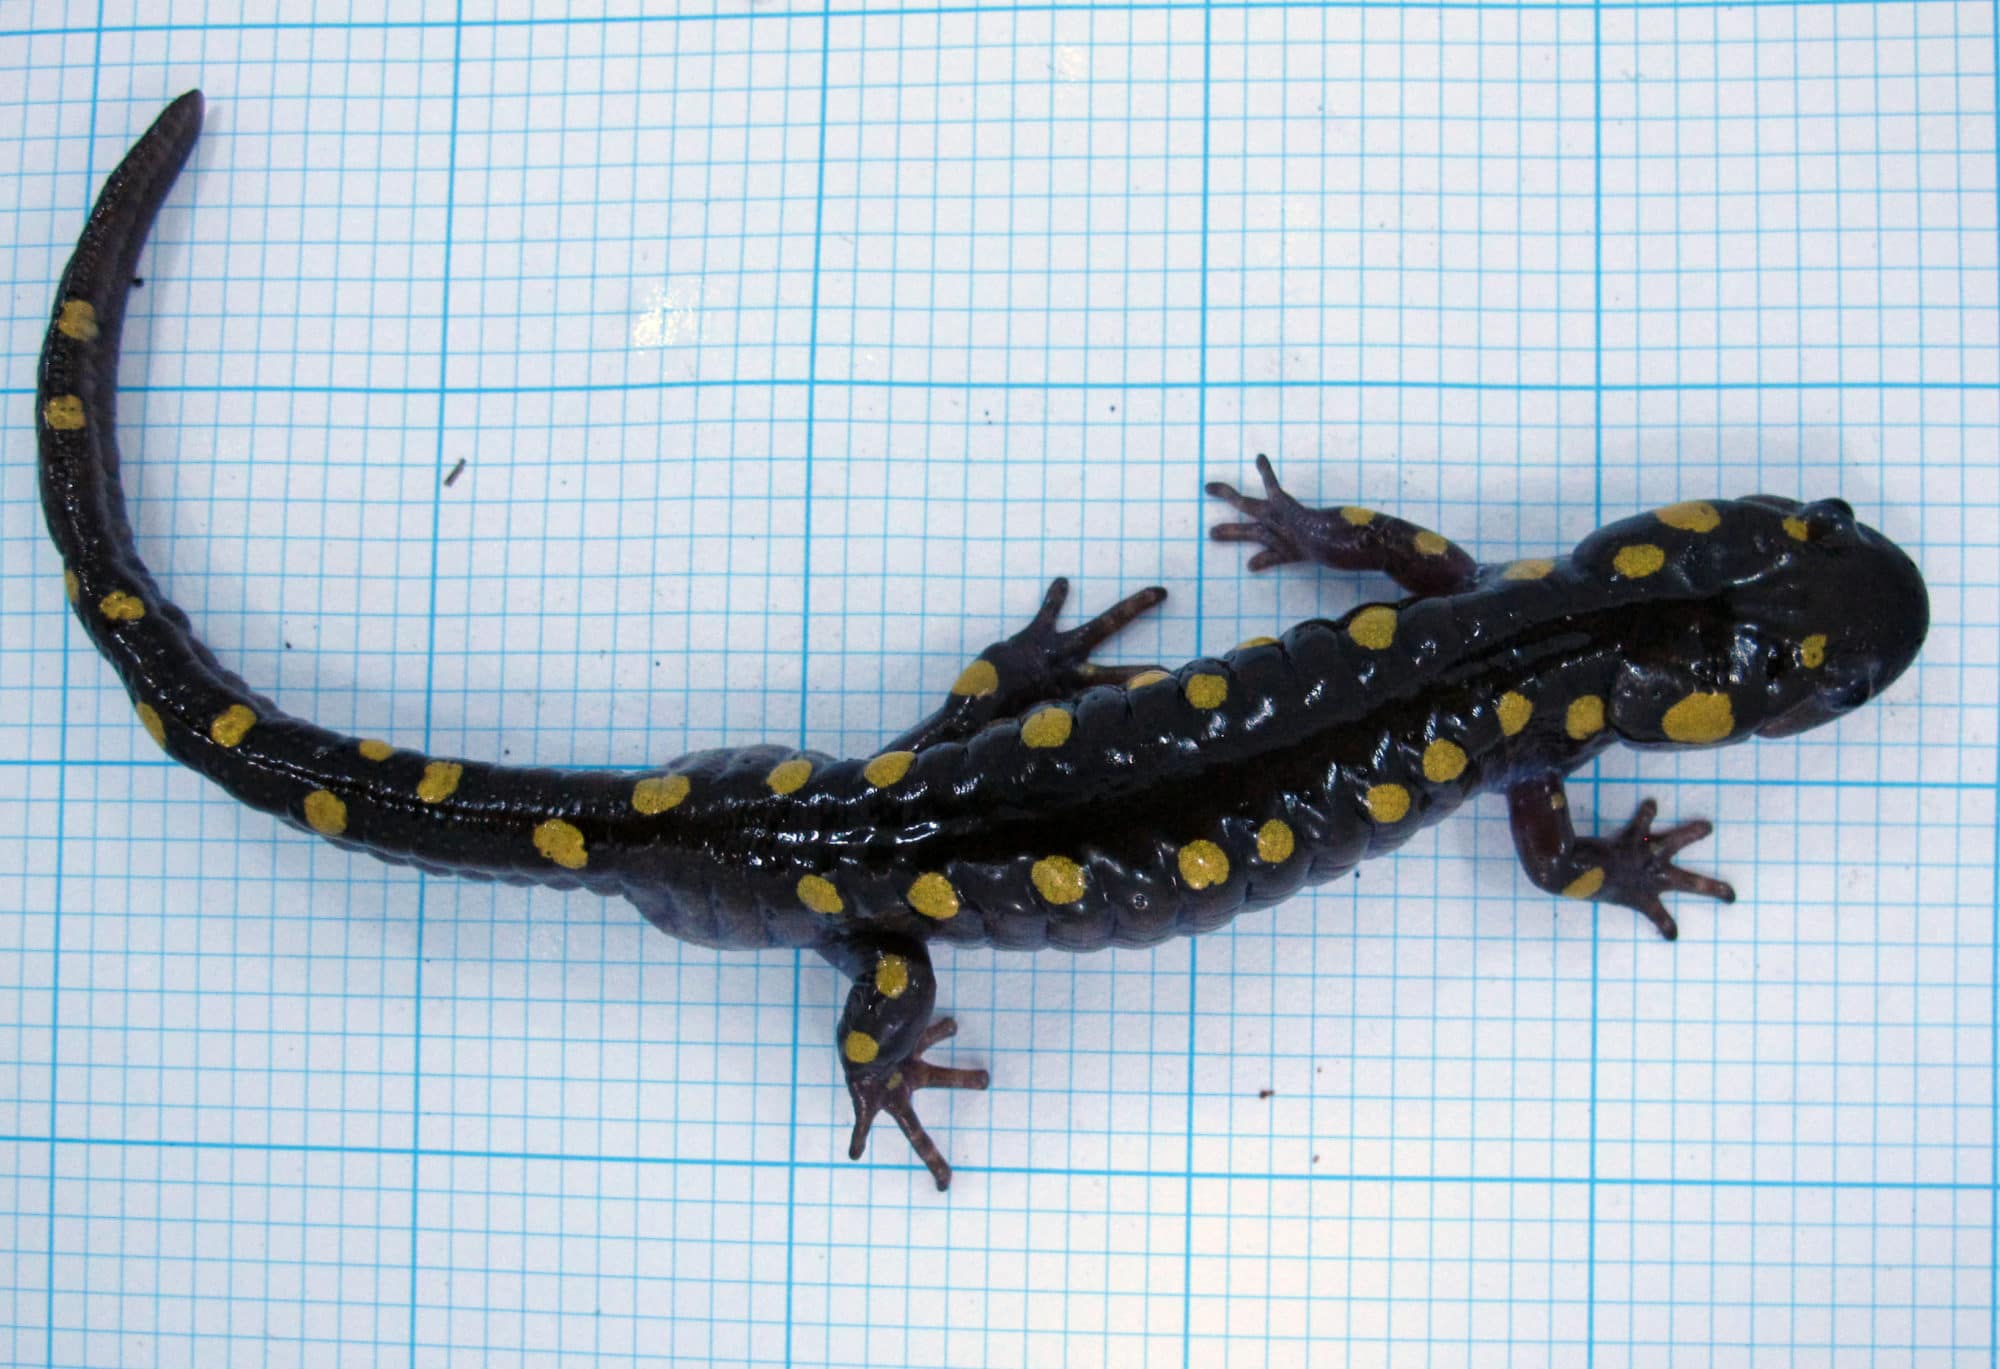 A spotted salamander on a background of graph paper. (photo © Brett Amy Thelen)